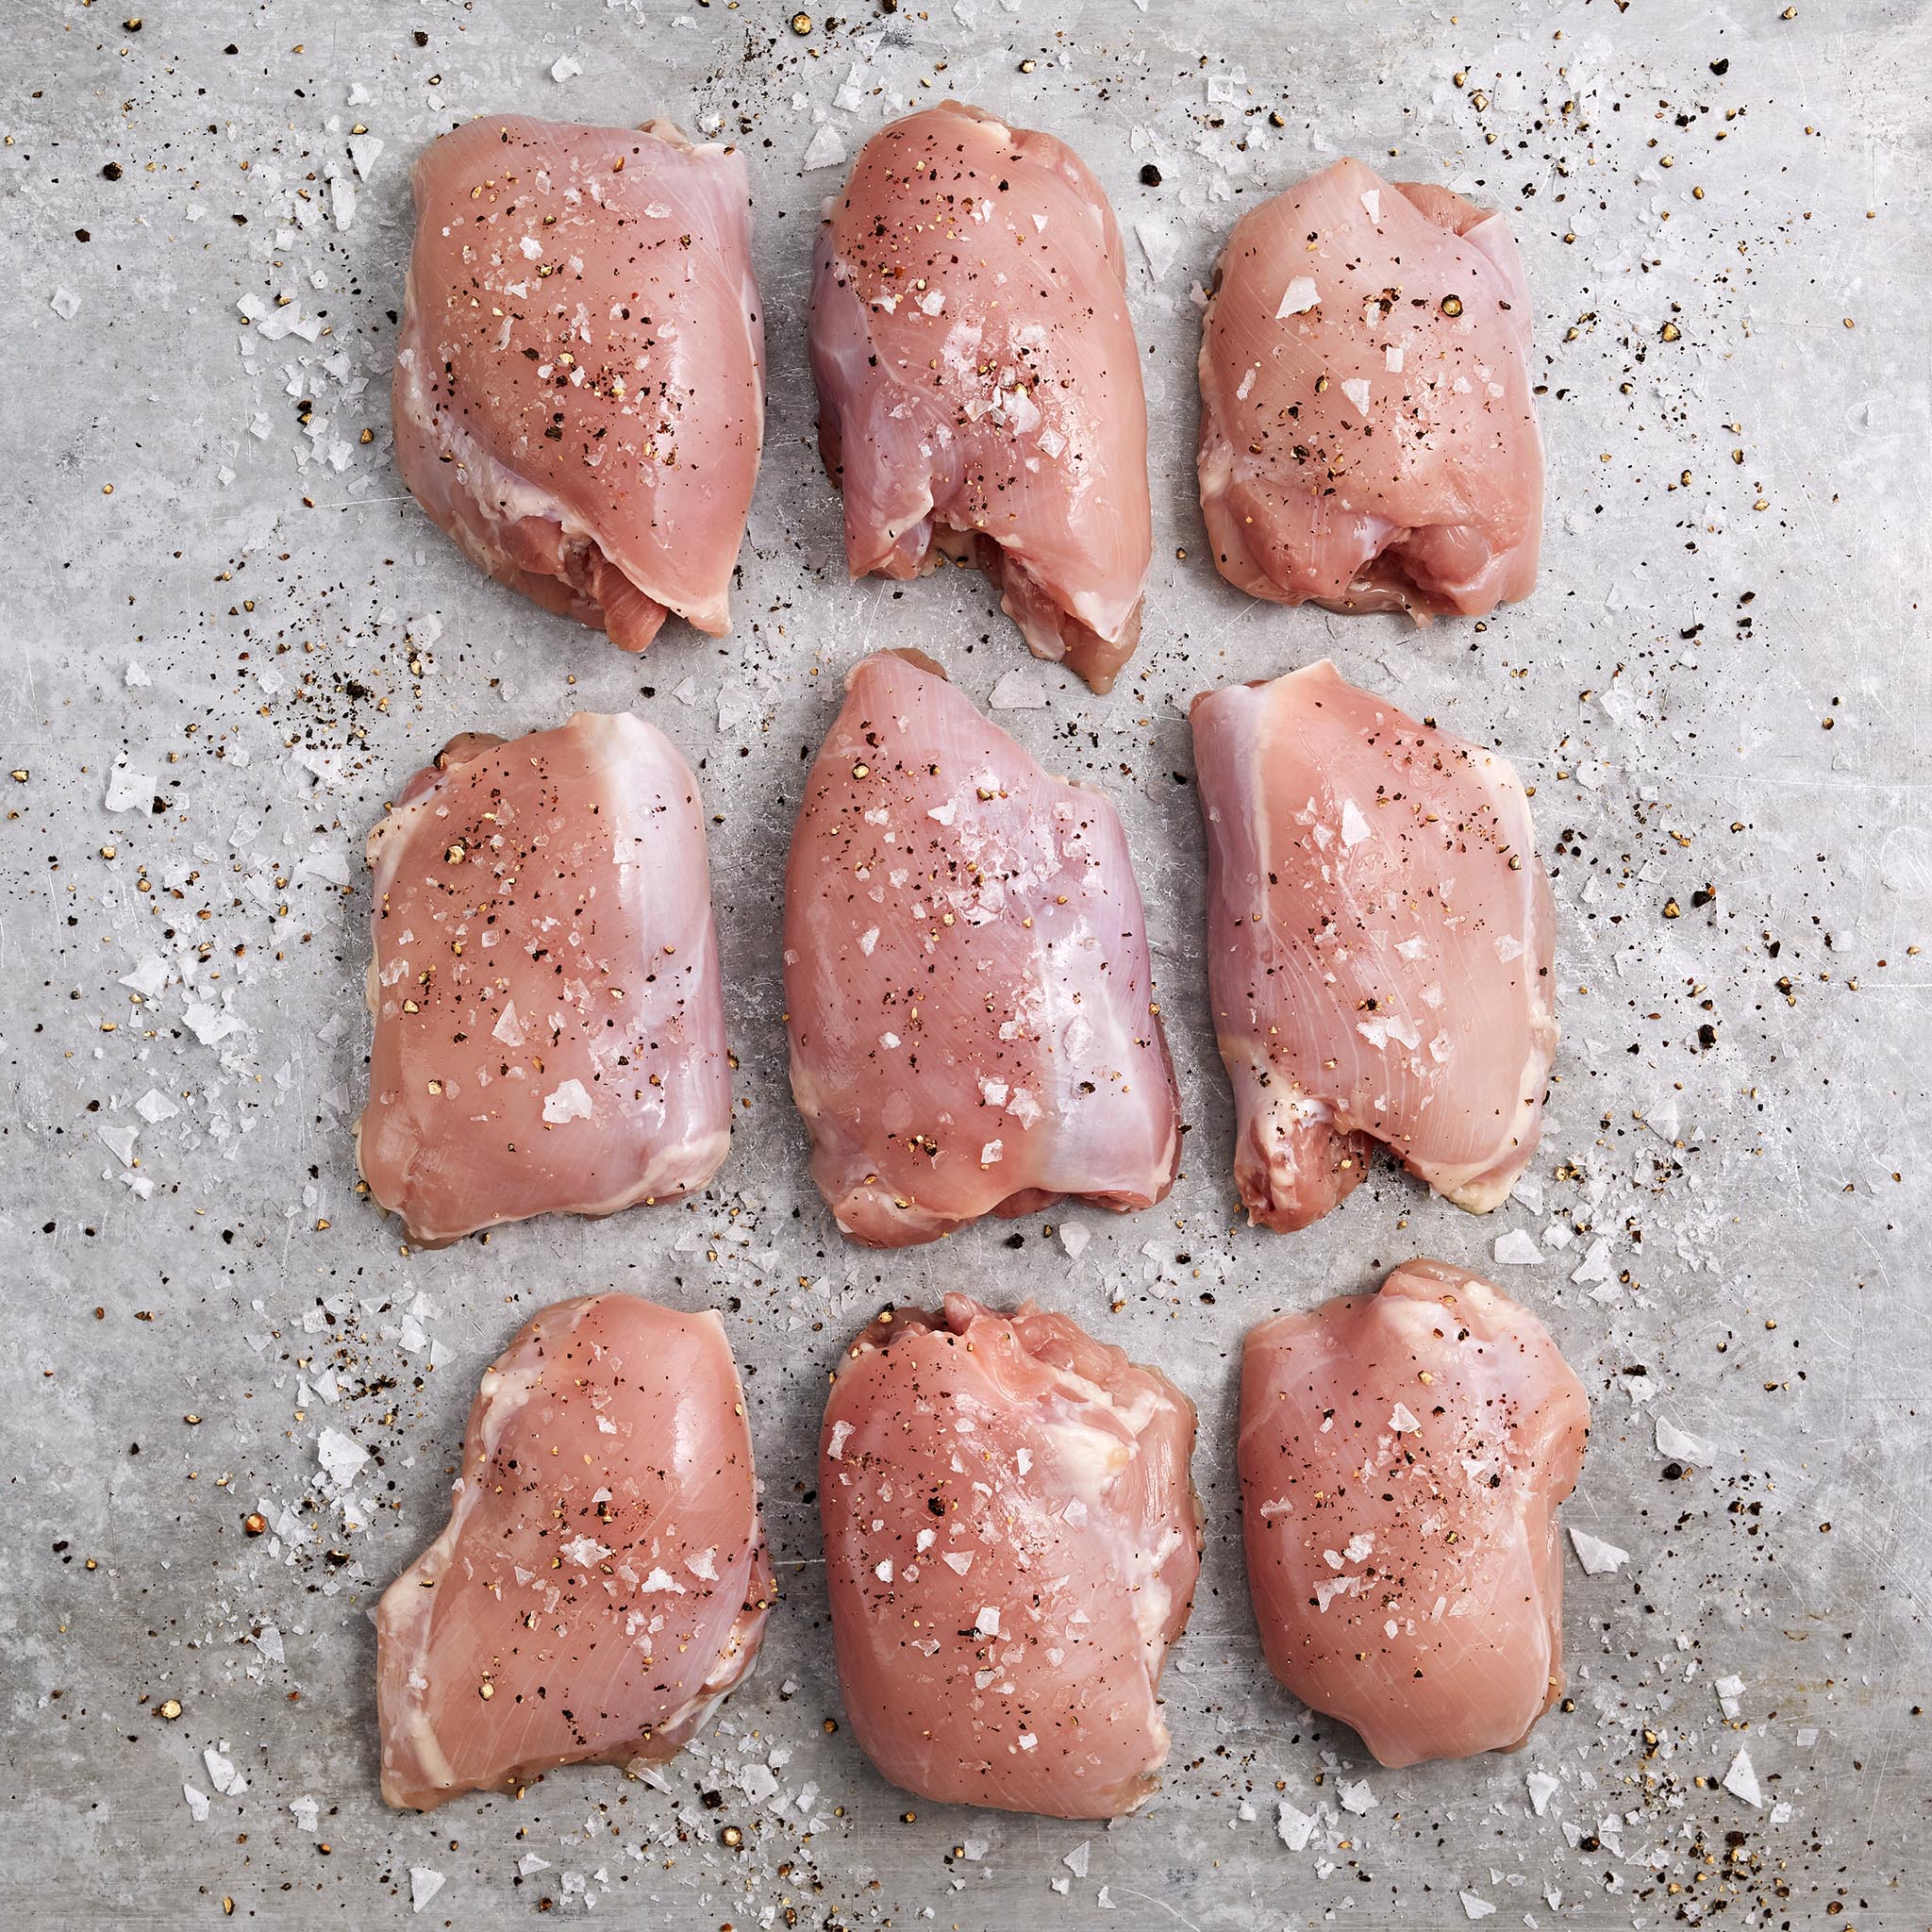 4448 WF Raw Boneless Skinless Chicken Thighs* Poultry